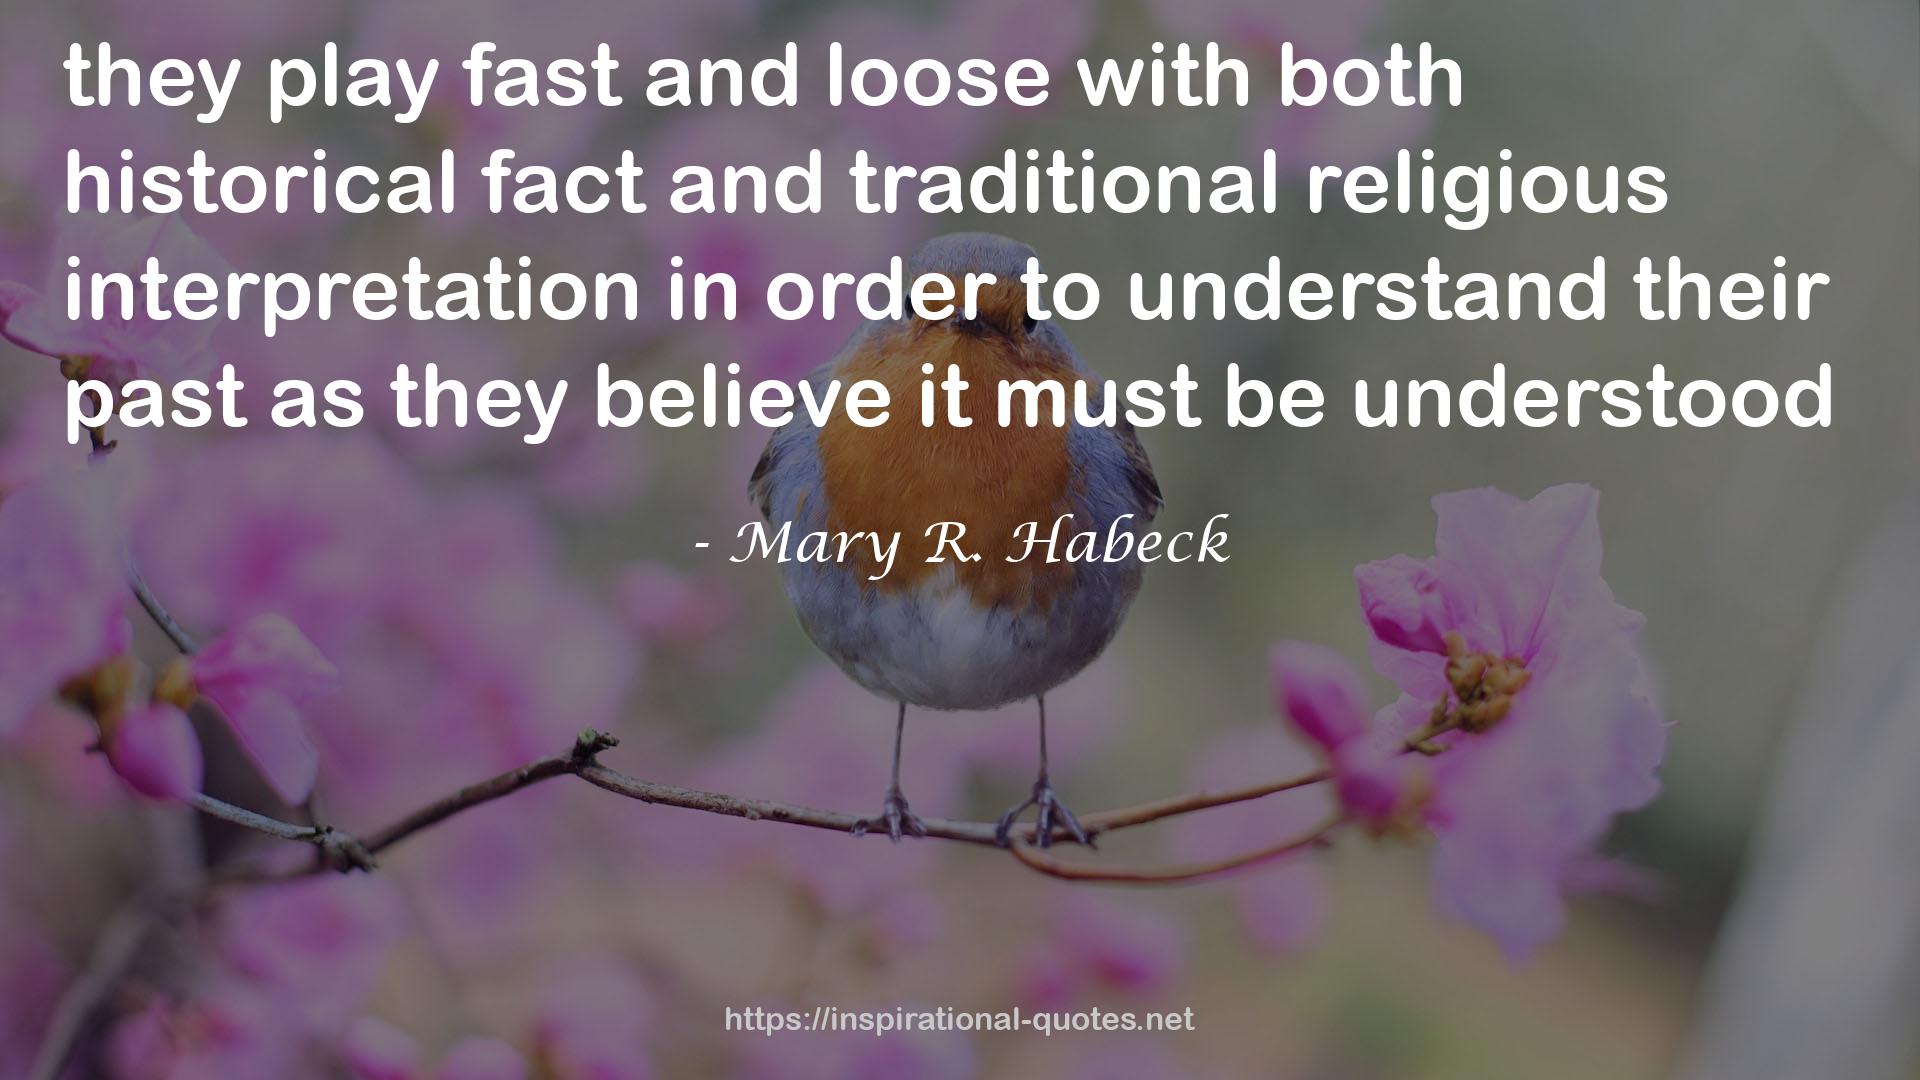 Mary R. Habeck QUOTES